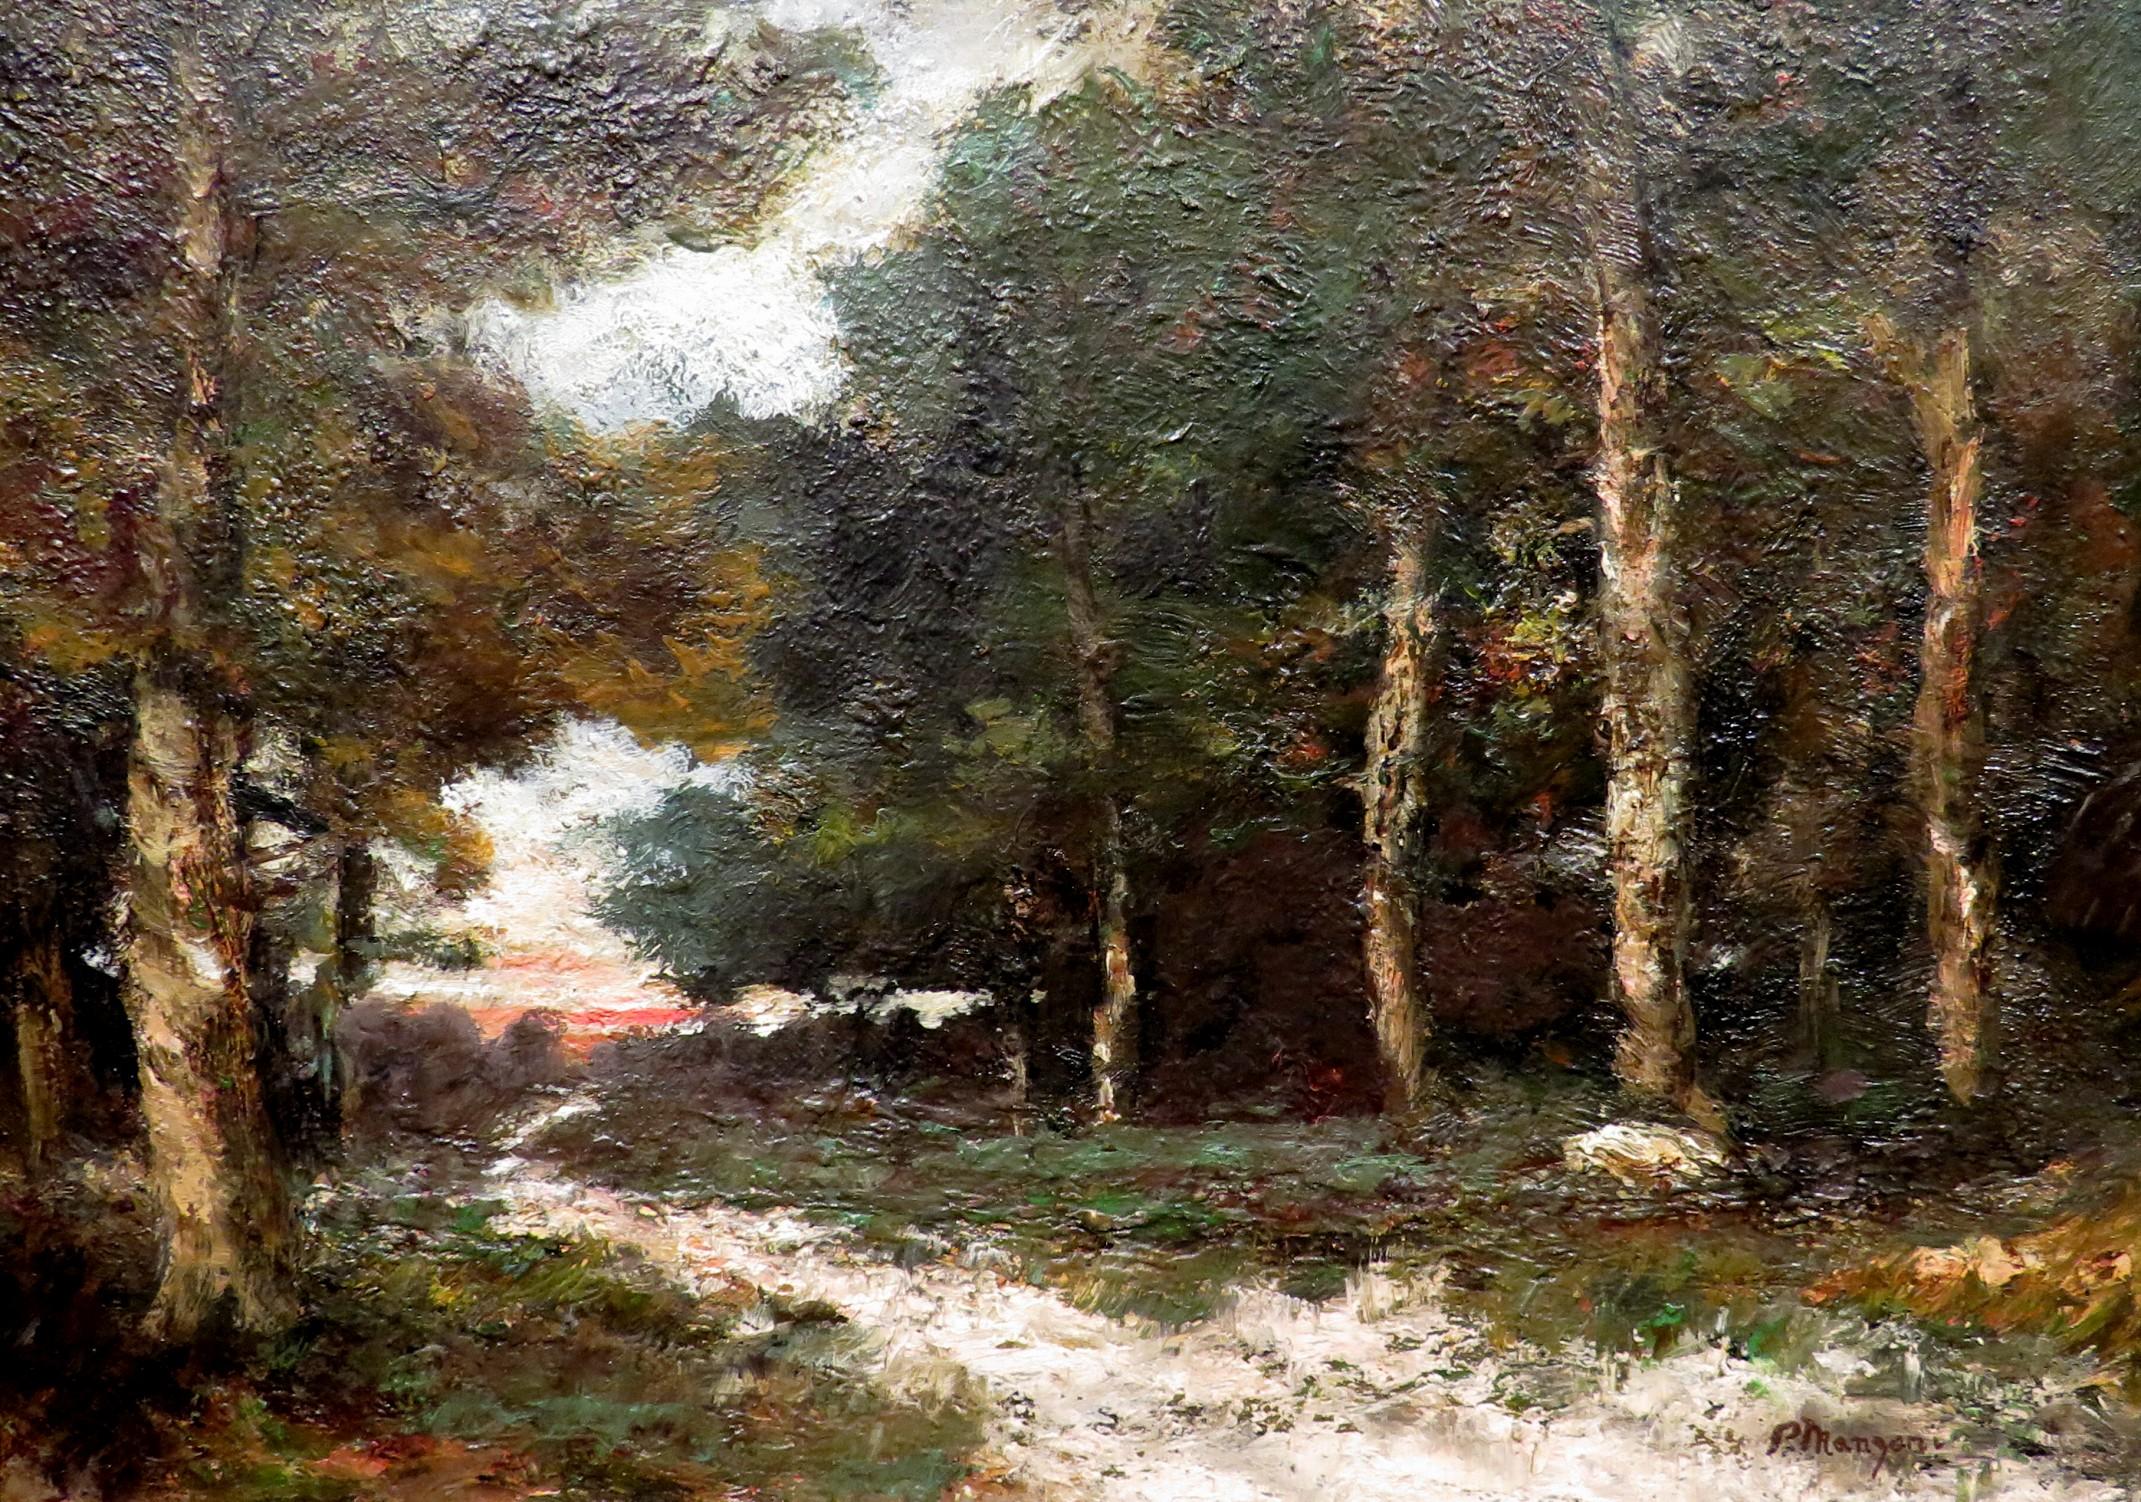 A finely executed 19th century Italian ‘plein air’ forested landscape, demonstrating a highly developed & balanced application of natural light, texture & shading. Oil on wood panel, signed P. Manzoni bottom right.    
Dimensions, (sight) 8.75